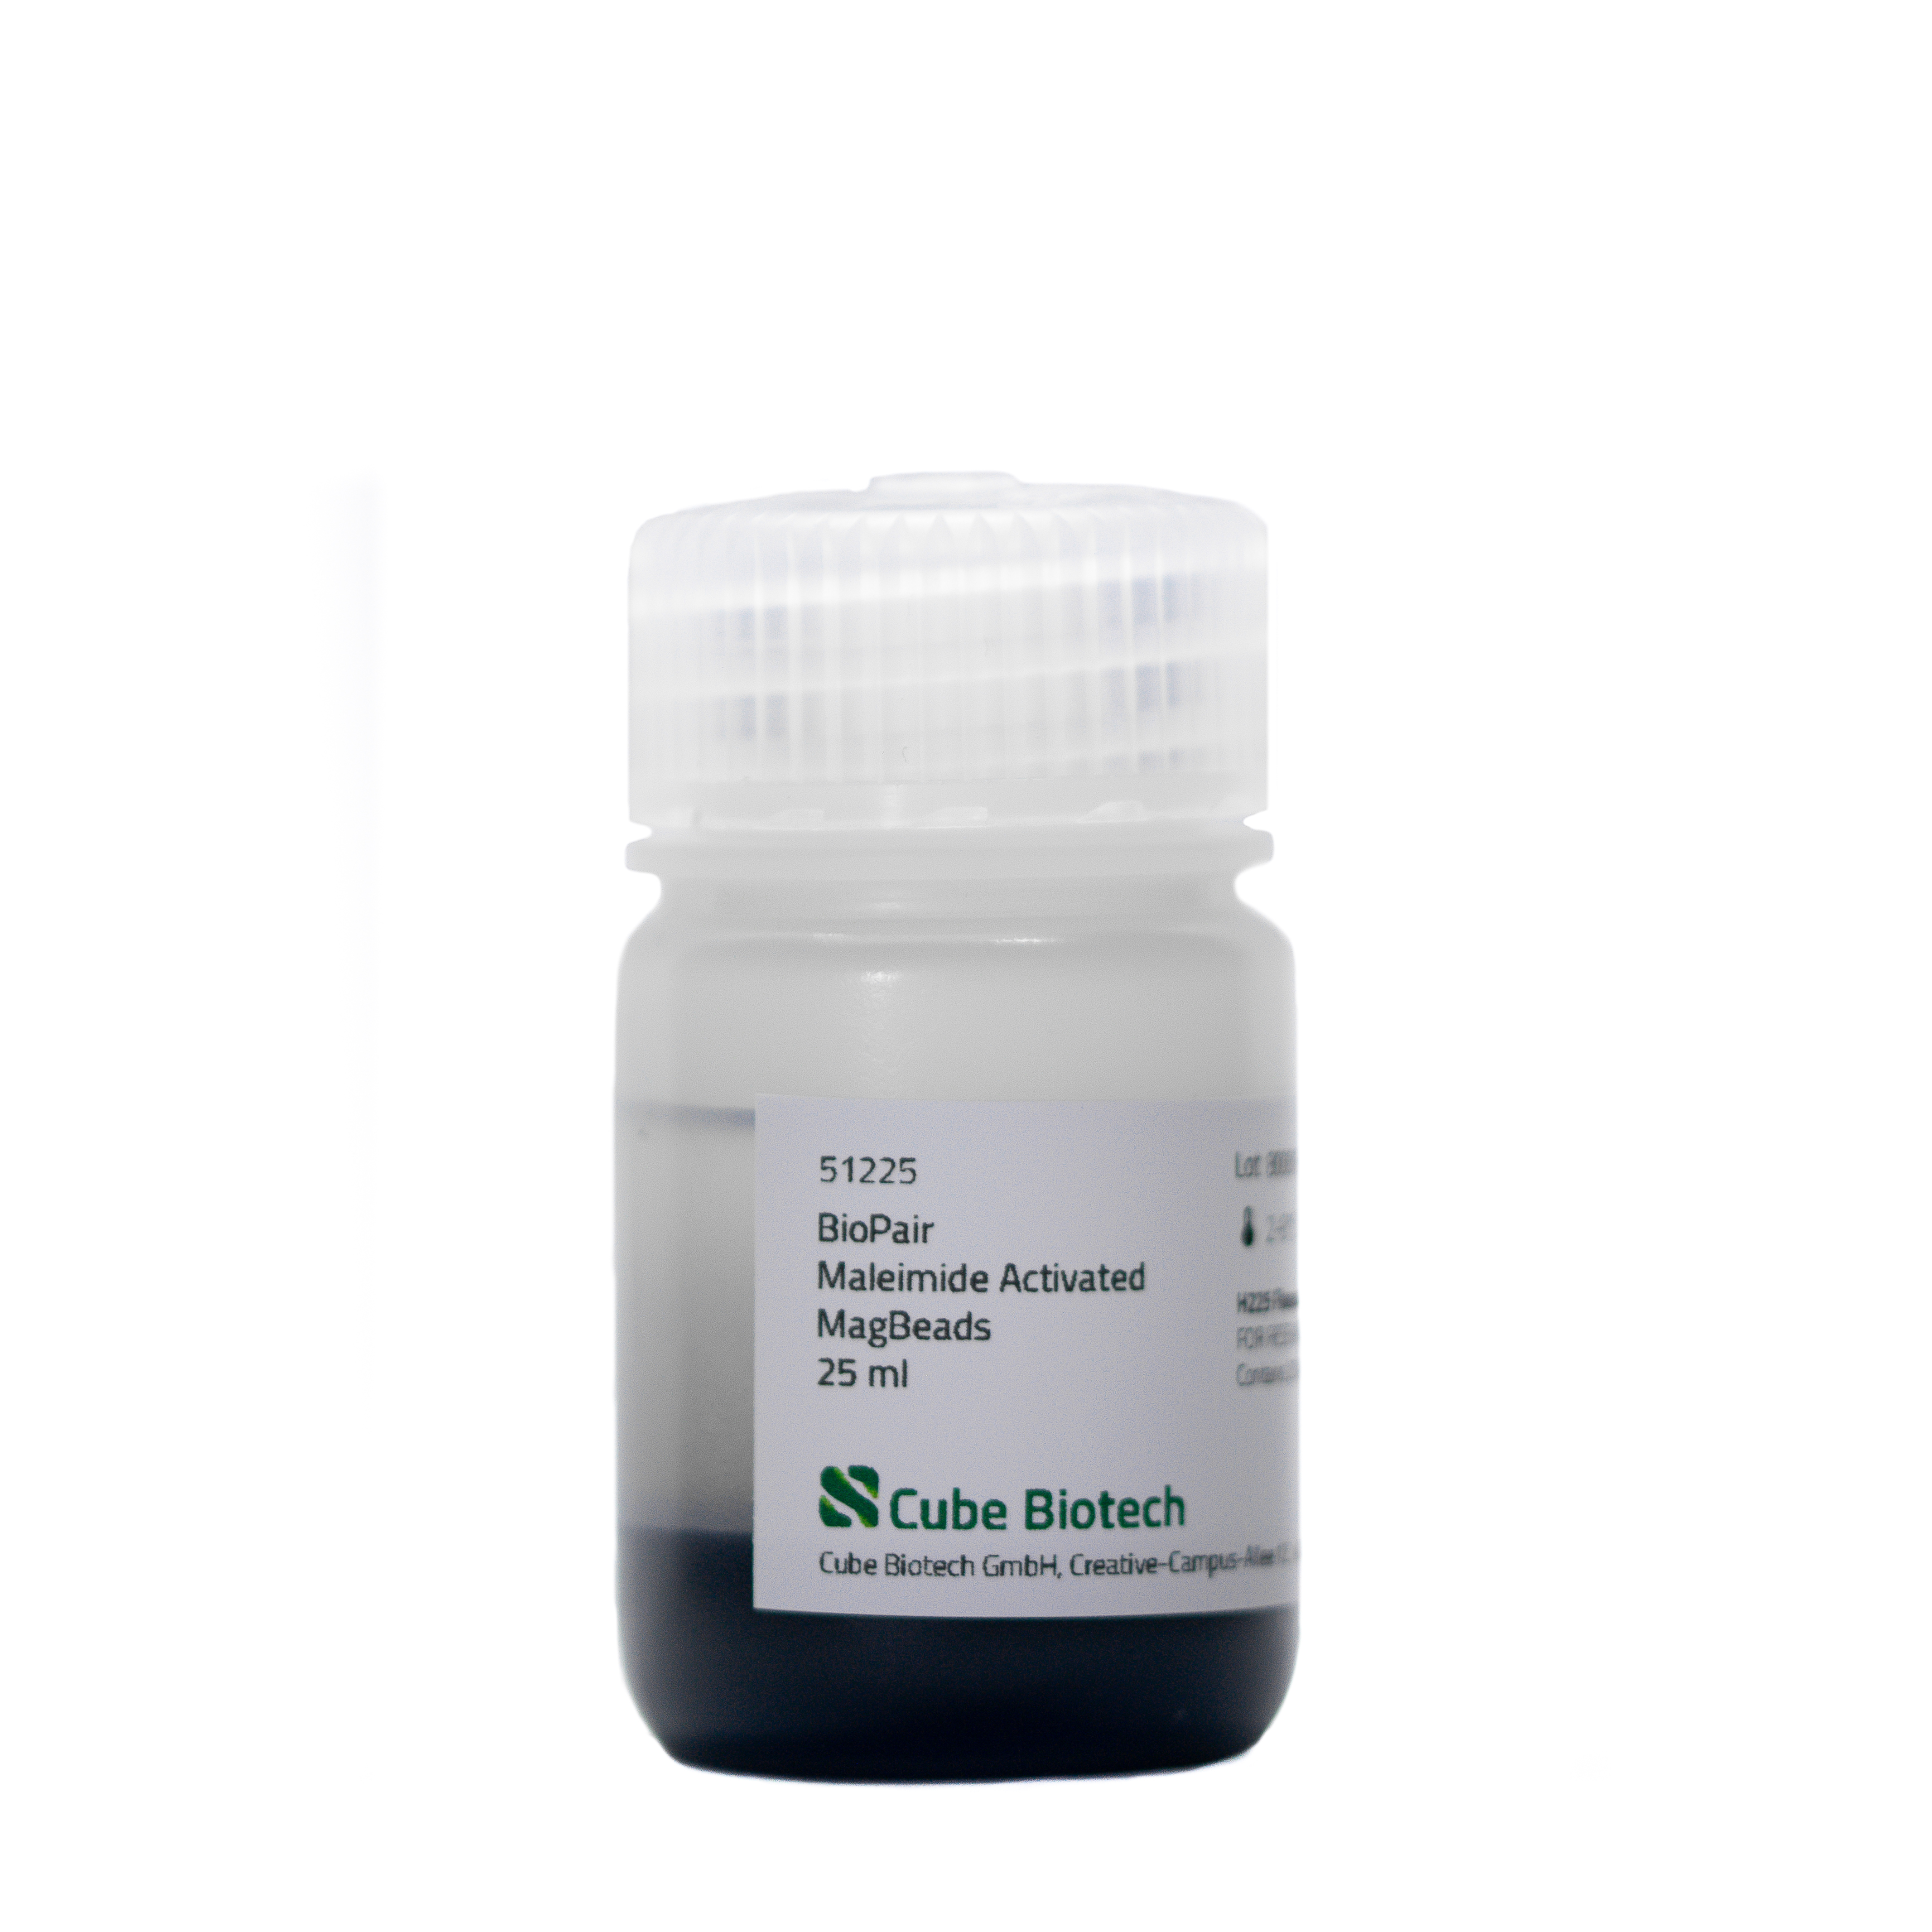 PureCube Maleimide Activated MagBeads